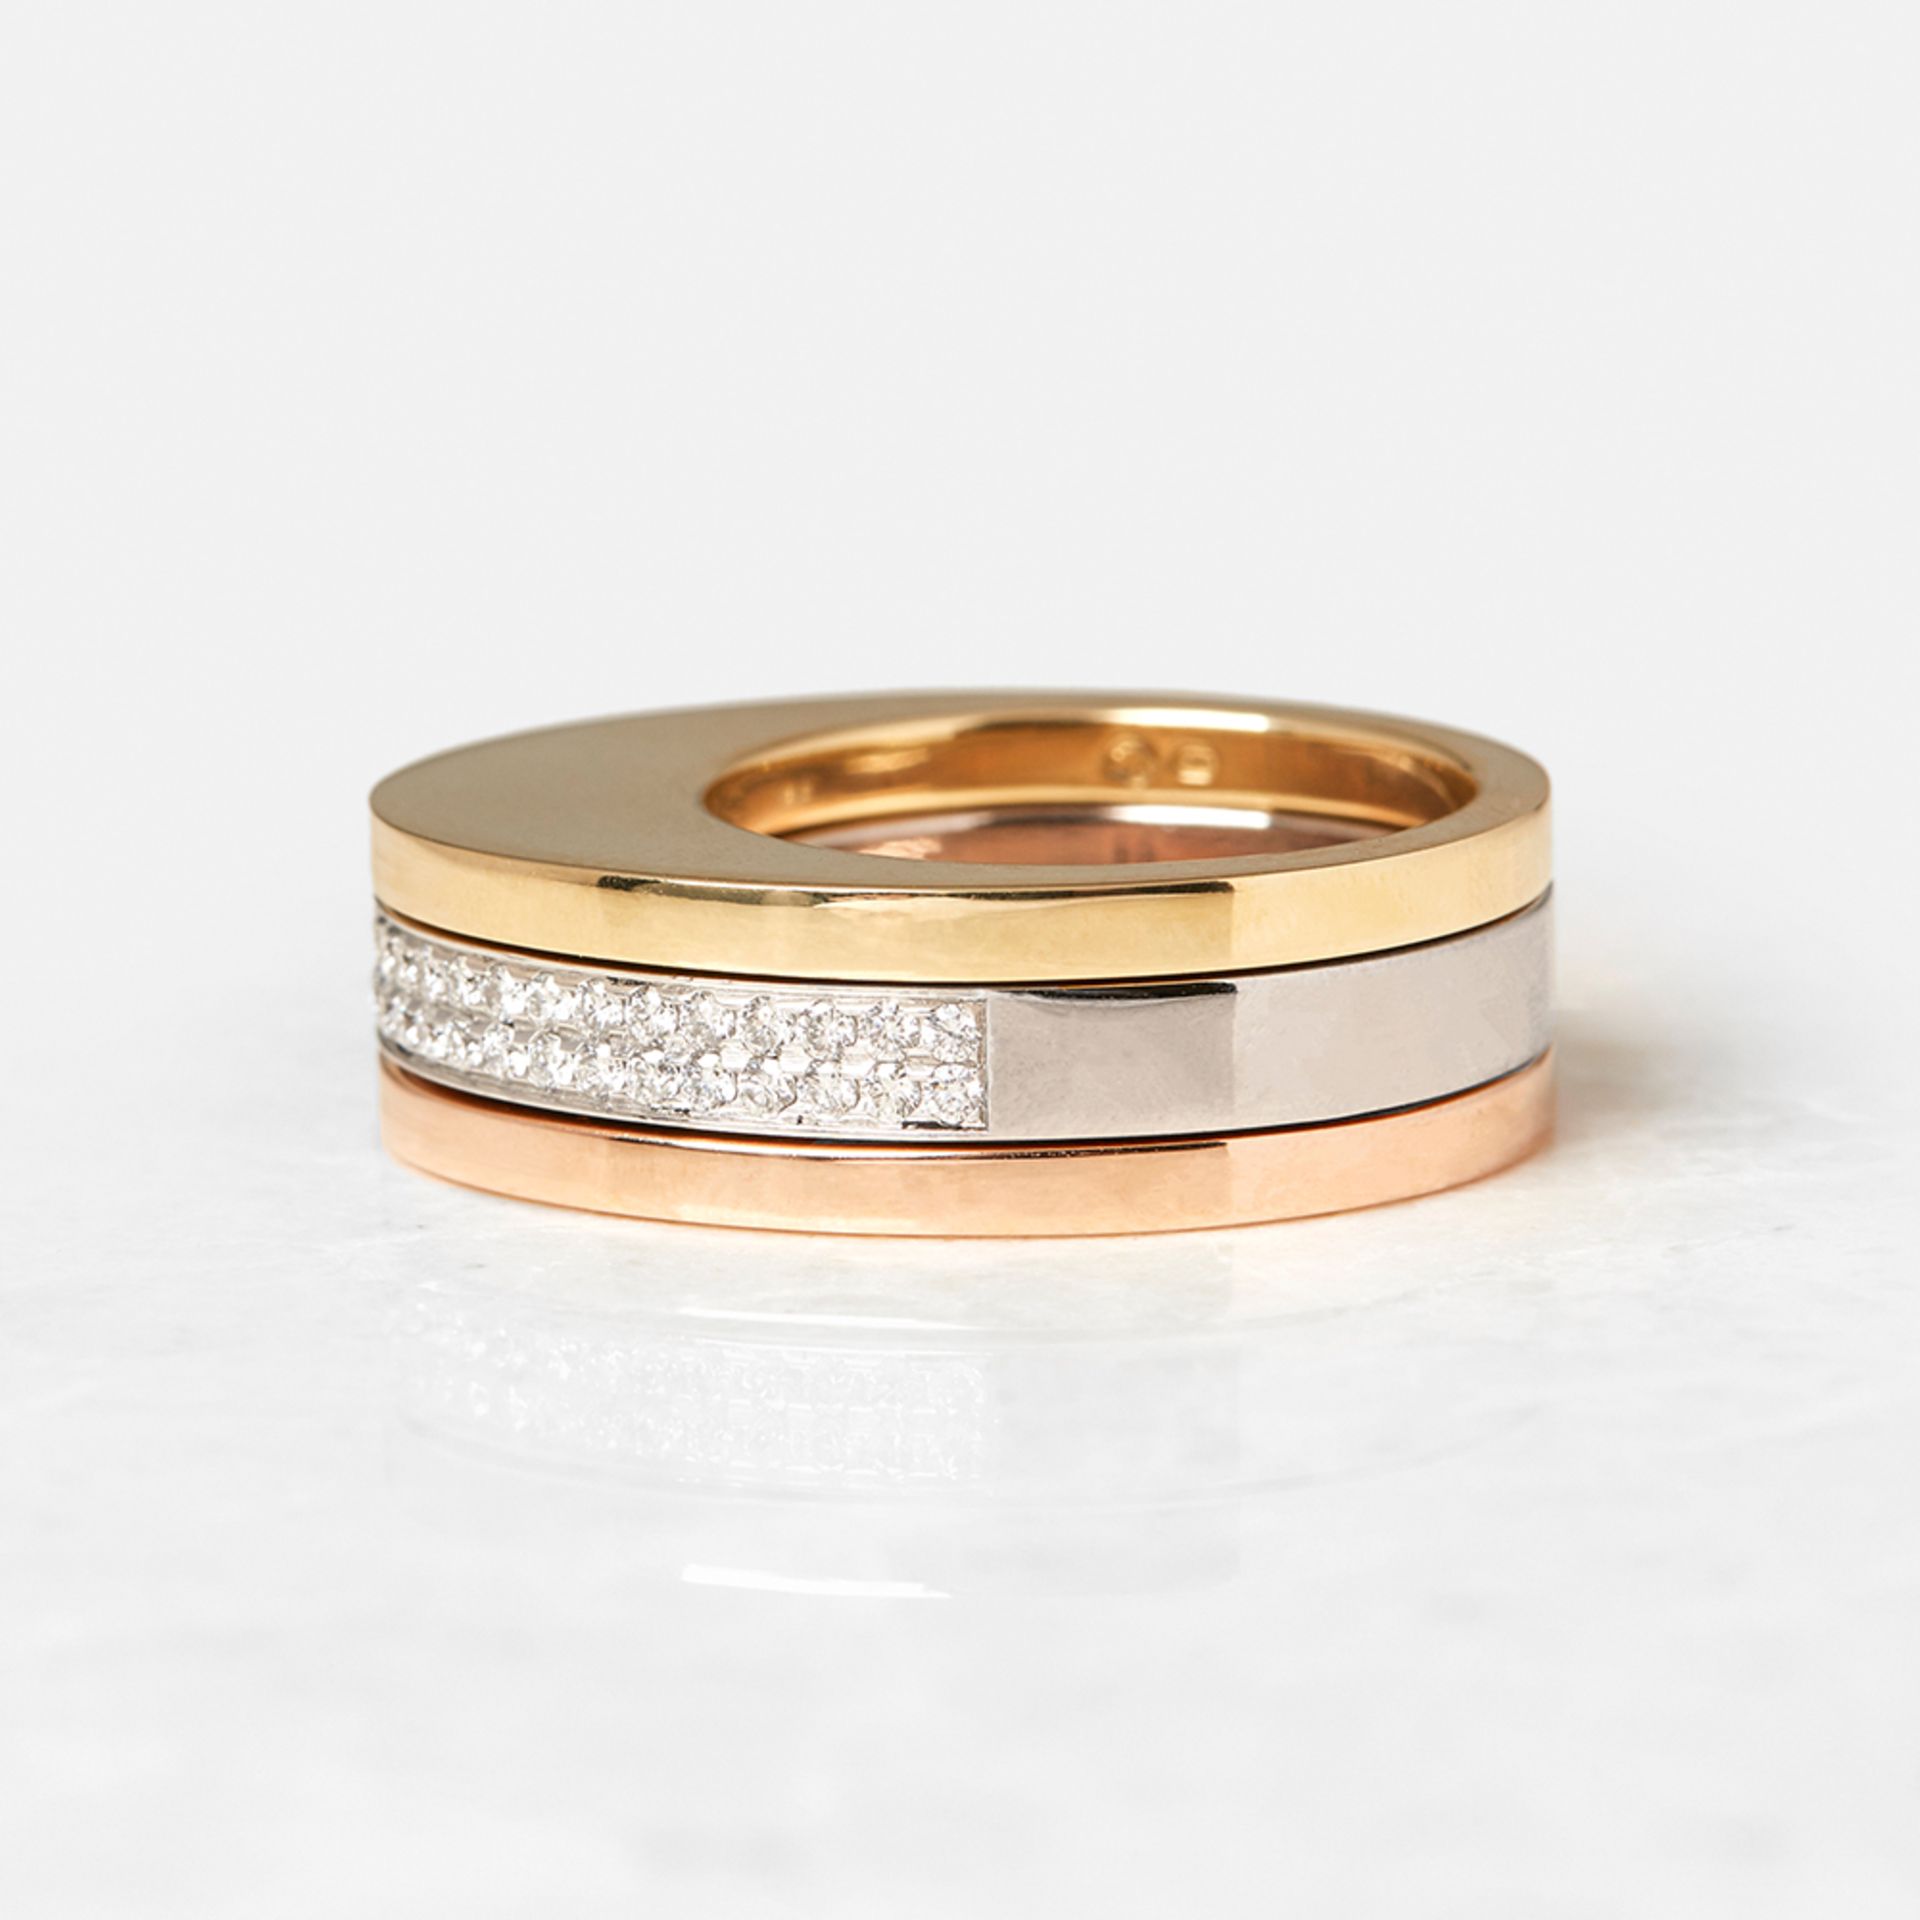 Tiffany & Co. 18k White, Rose & Yellow Gold Stackable Rings - Image 3 of 11